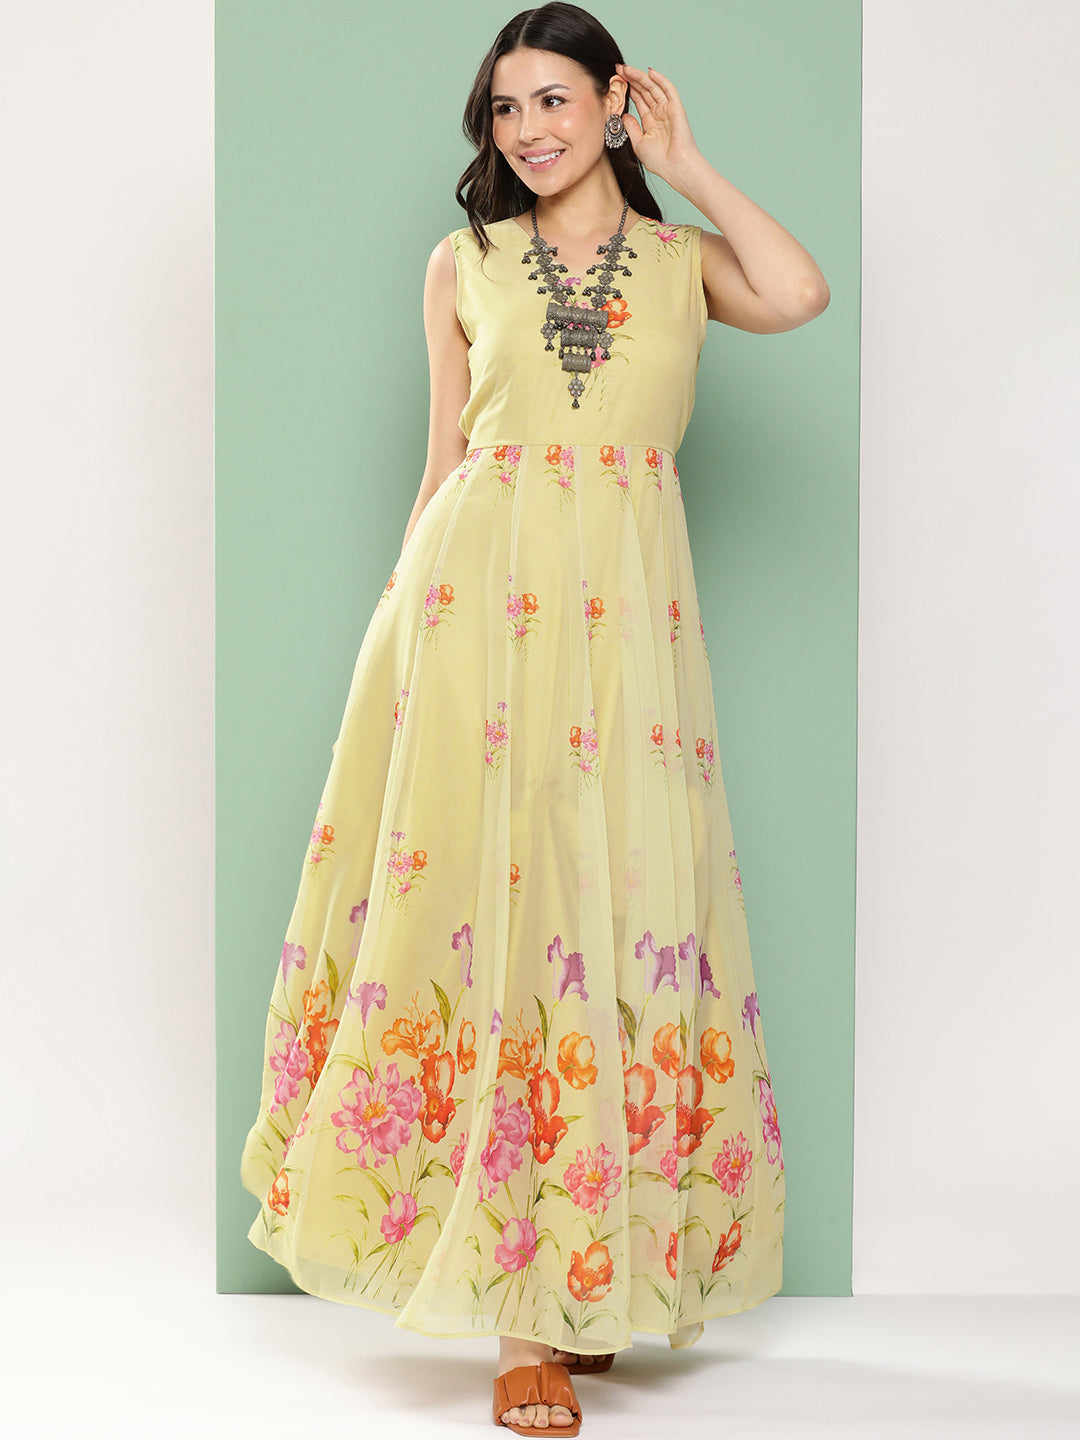 Women's Yellow Printed Long Dress V-Neck With Lace Details - Bhama Couture